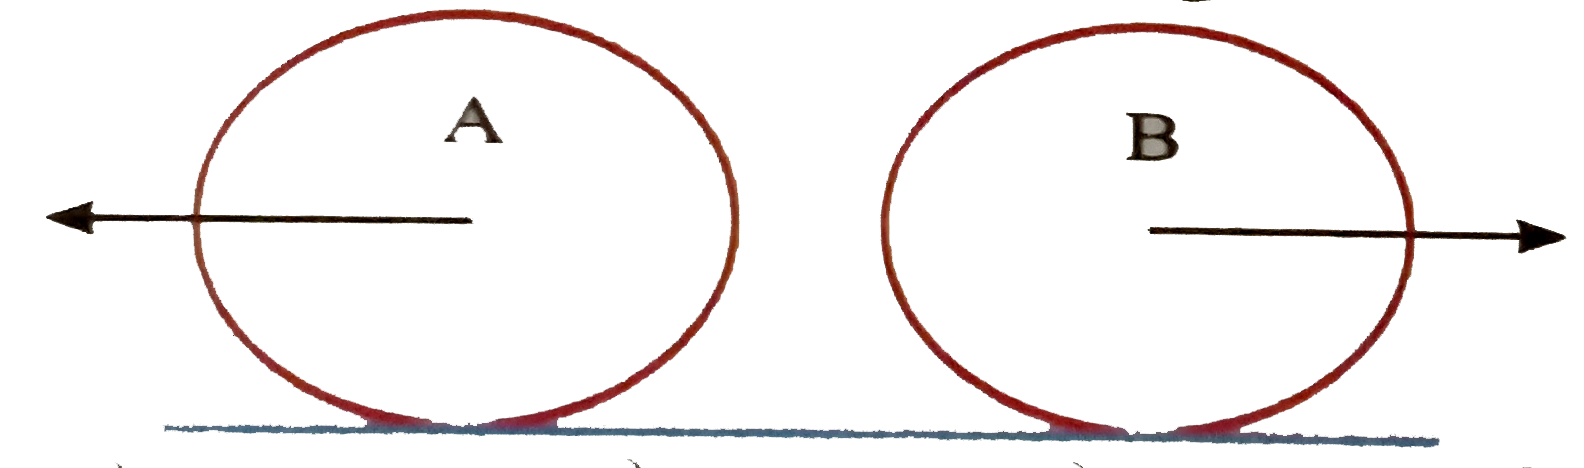 Two identical conducting rings A and B of radius R are rolling over a horizontal conducting plane with same speed v but in opposite direction. A constant magnetic field B is present pointing into the plane of paper. Then the potential difference between the highest points of the two rings is